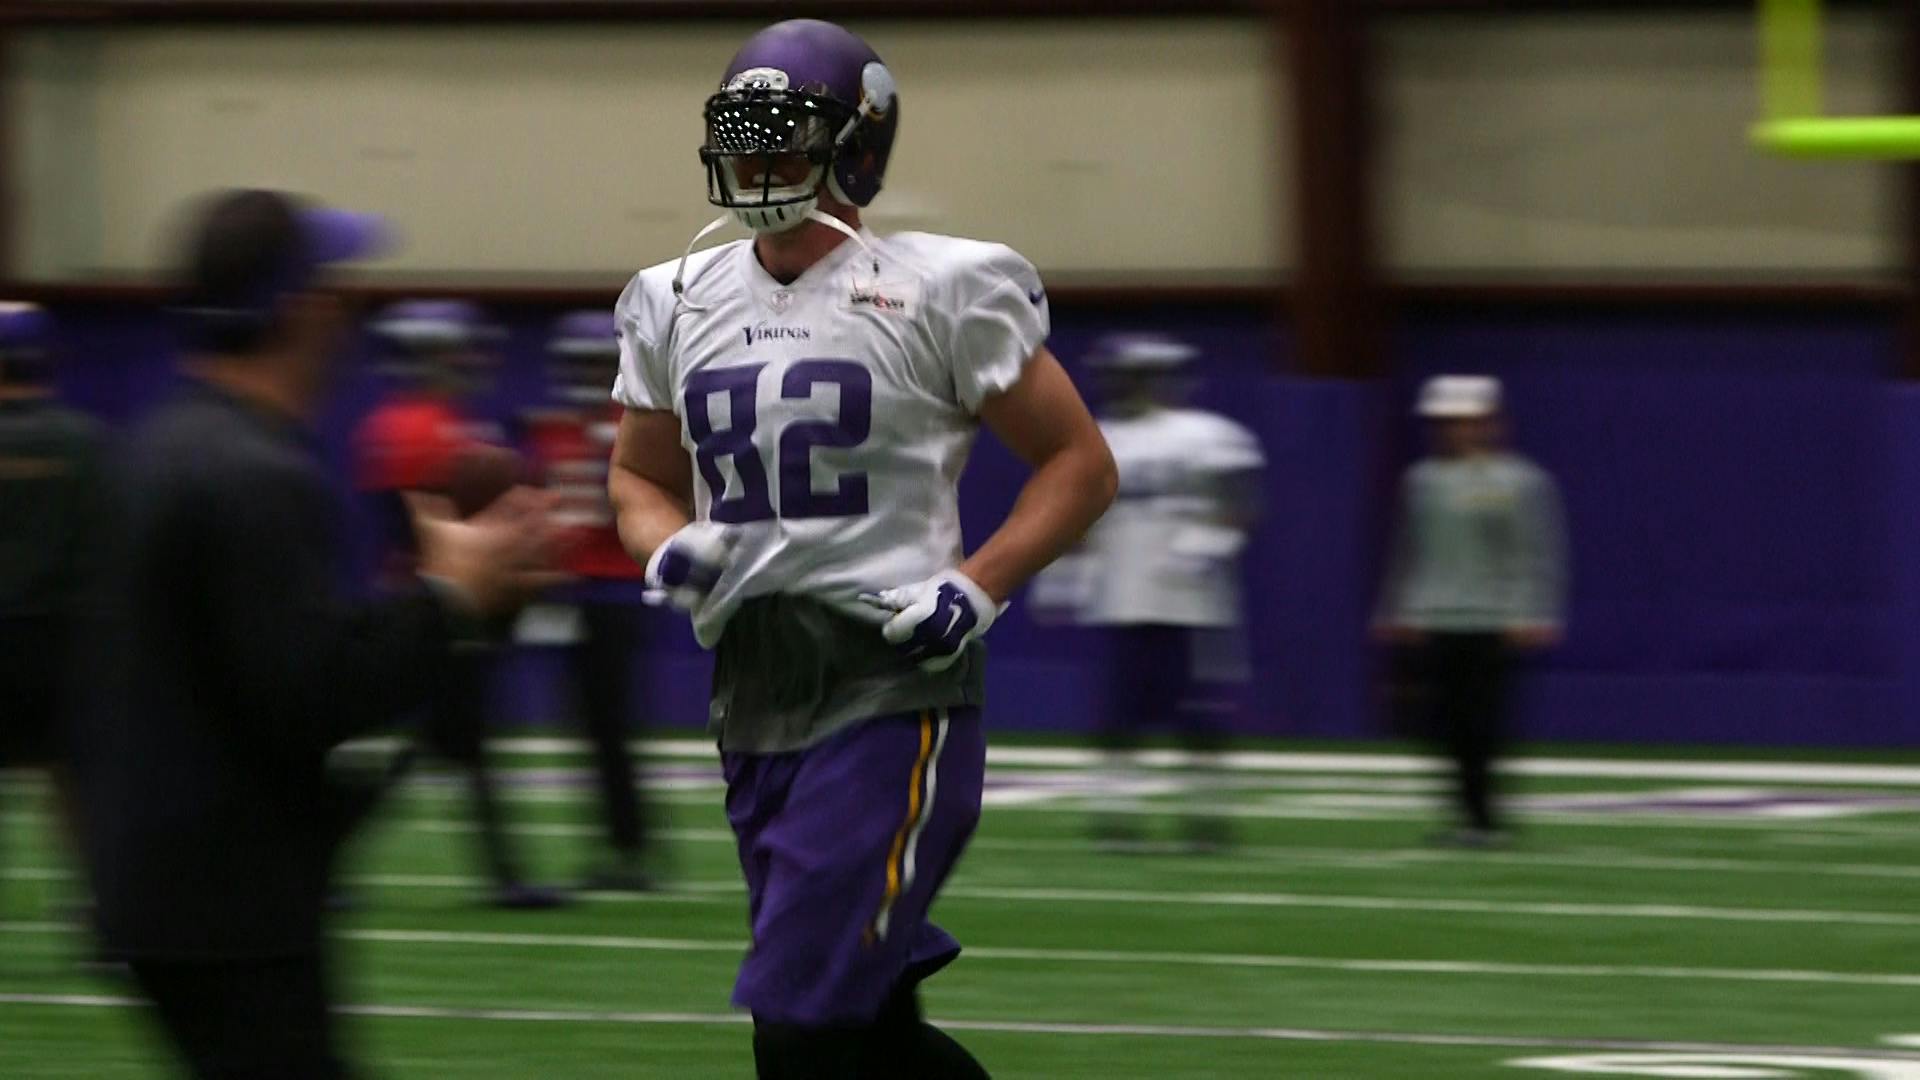 Vikings tight end Kyle Rudolph is excited to be back practicing with his teammates and says he is going to do everything he can to play on Sunday.